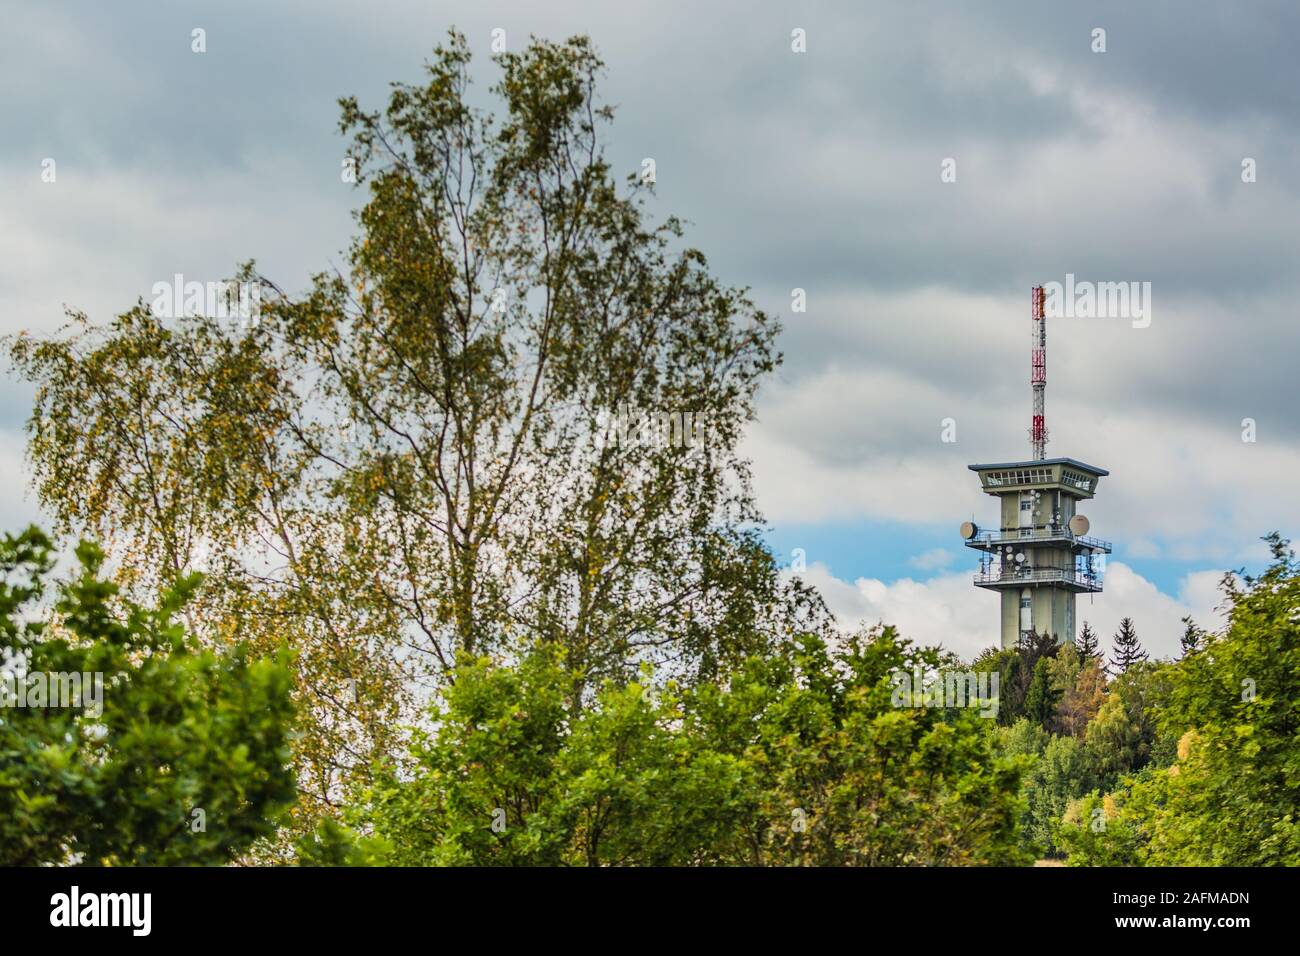 Zelena hora, Pelhrimov / Czech Republic - September 13 2019: Distant view of television communication tower with satellite dishes on. Cloudy sky. Stock Photo